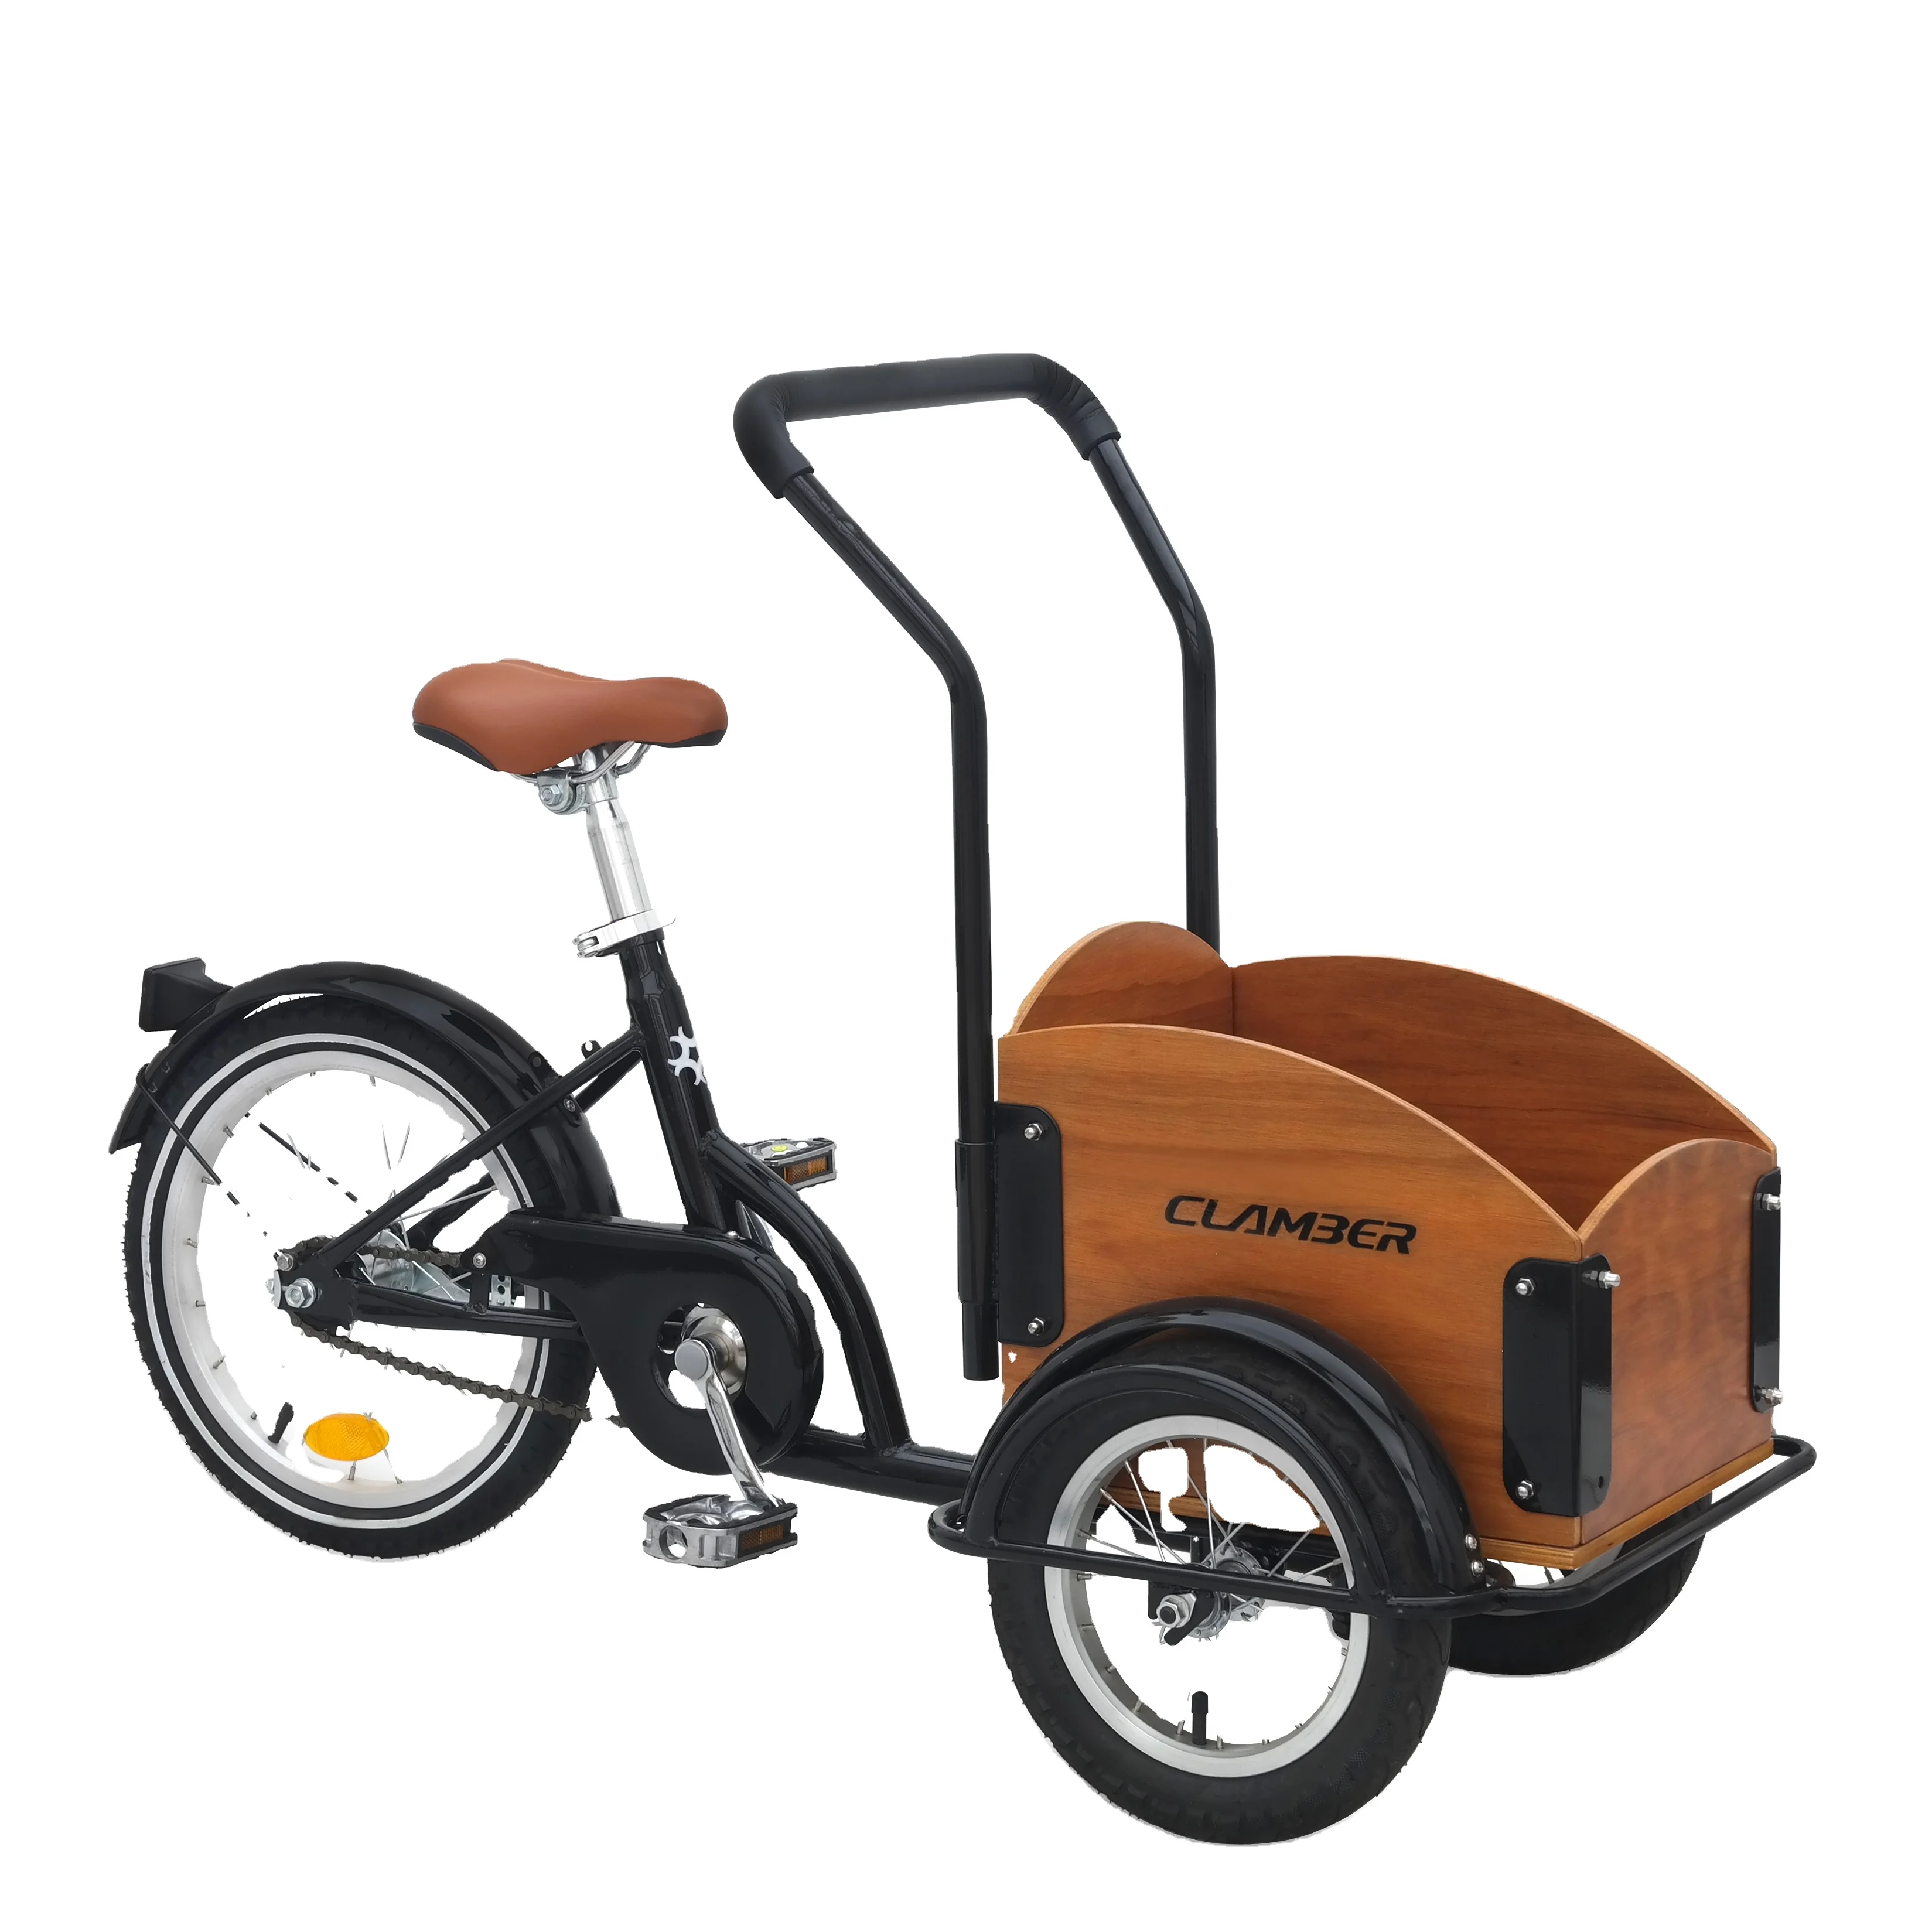 Achternaam Wet en regelgeving Darts Source China Clamber Cargo bike motorised tricycle for carry children  bicycle with cargo box on m.alibaba.com